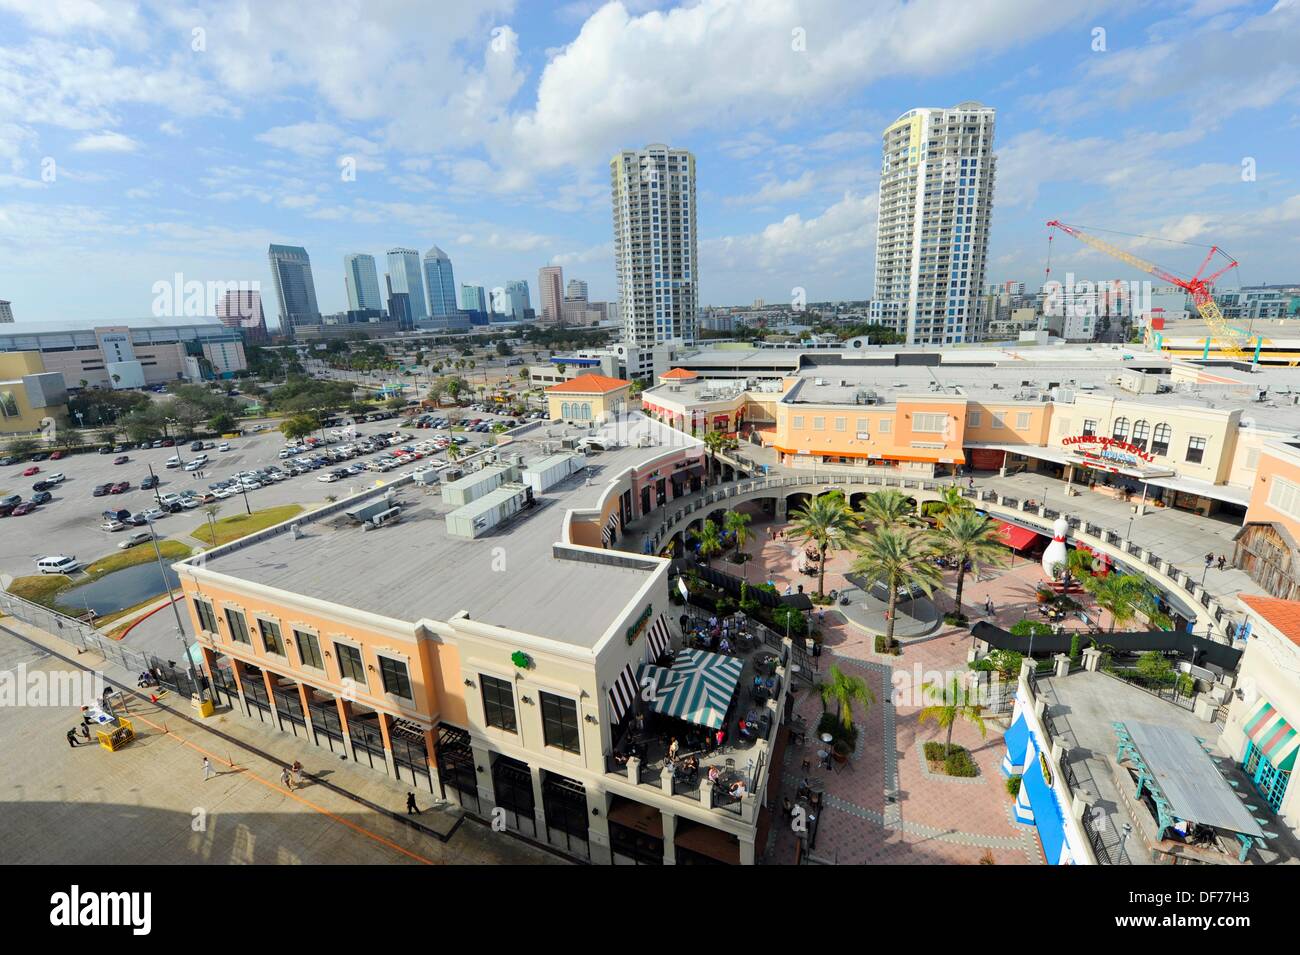 Channelside Bay Shopping Plaza Downtown Tampa Florida Stock Photo